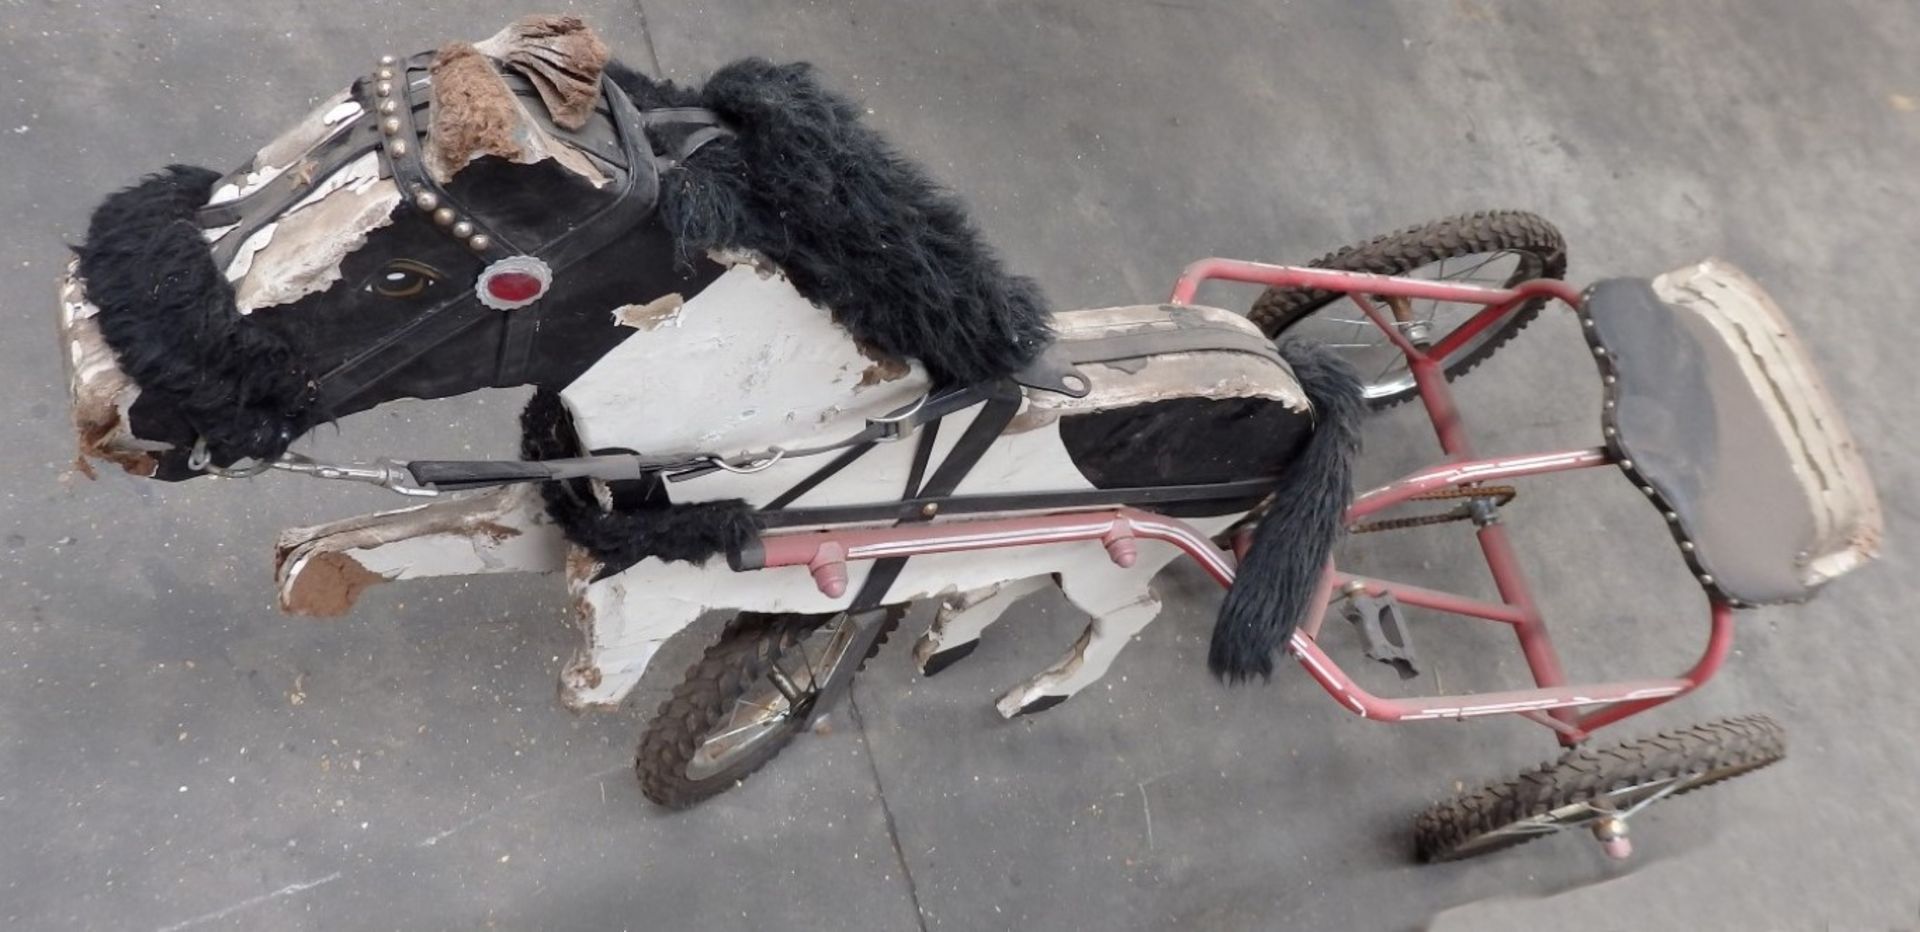 1 x Childrens Pony and Trap Bike - Barn Find - Needs Renovation Work - Overall Length 165cm - - Image 3 of 10